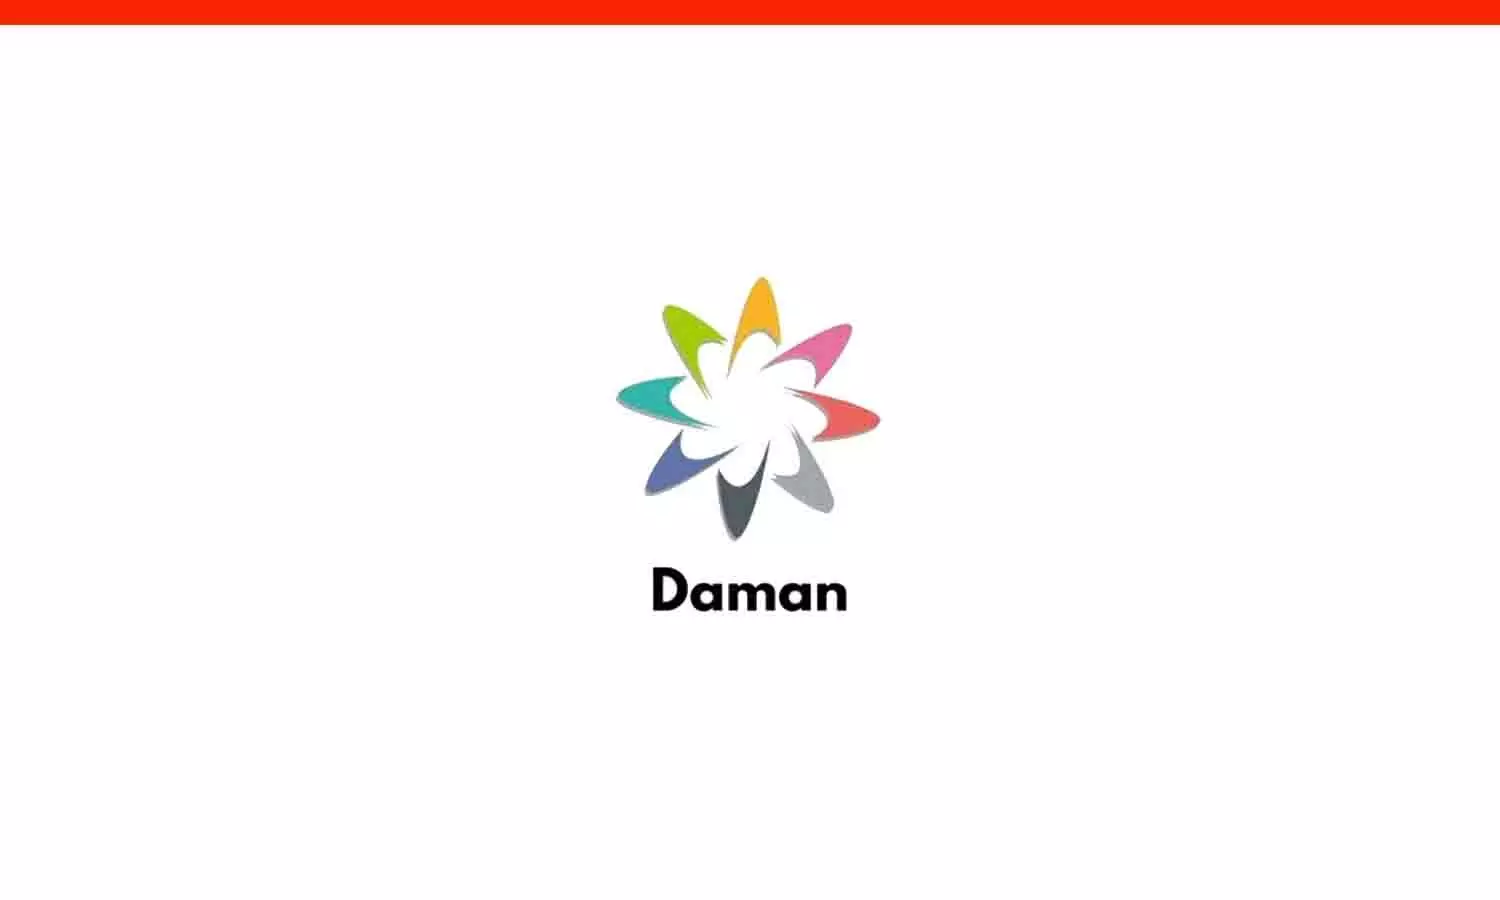 Daman Games App Bonuses Explained: Maximizing Your Earnings with Sign-Up, Red Pocket, and More